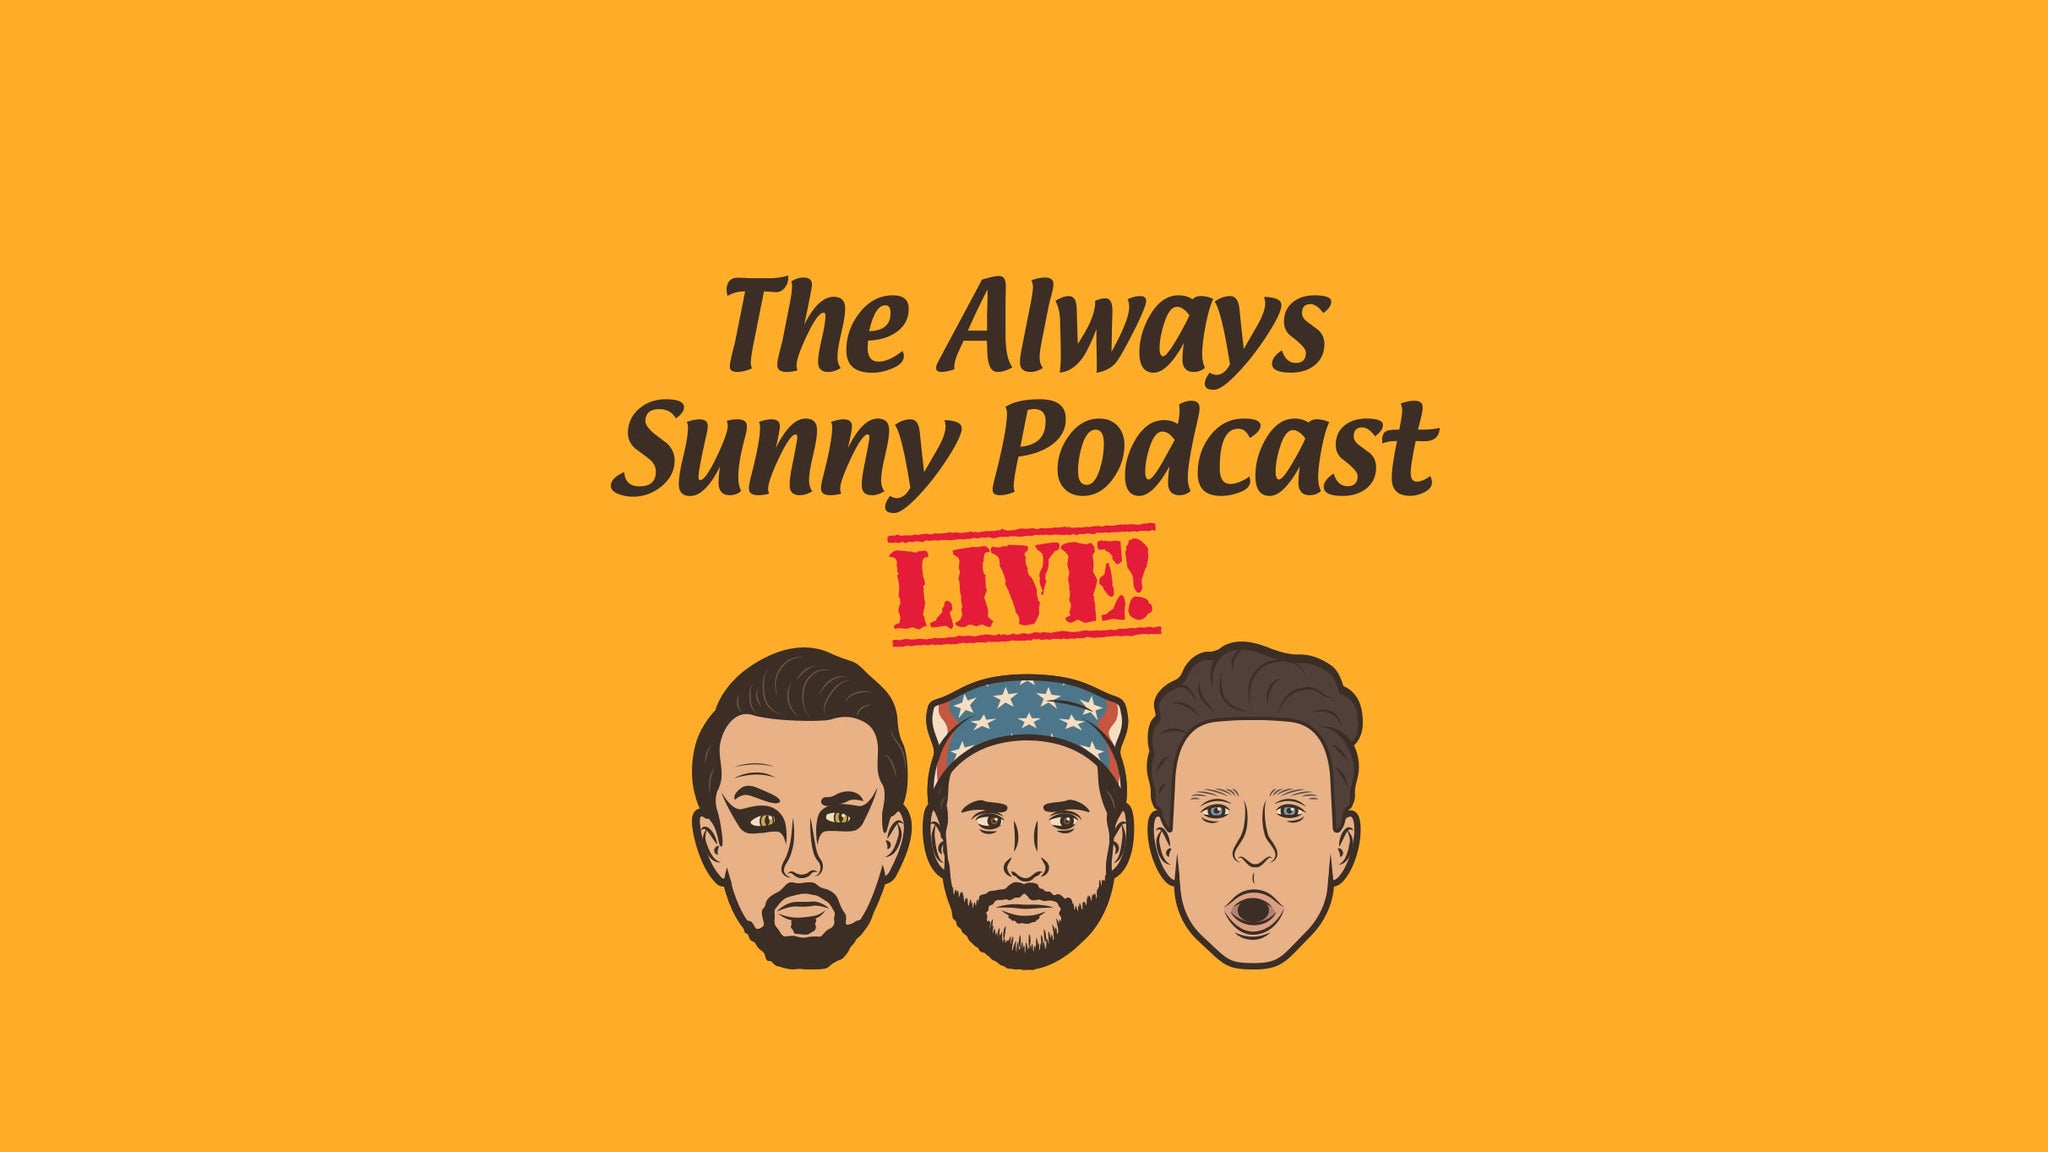 Four Walls Presents The Always Sunny Podcast LIVE! presale password for advance tickets in Philadelphia